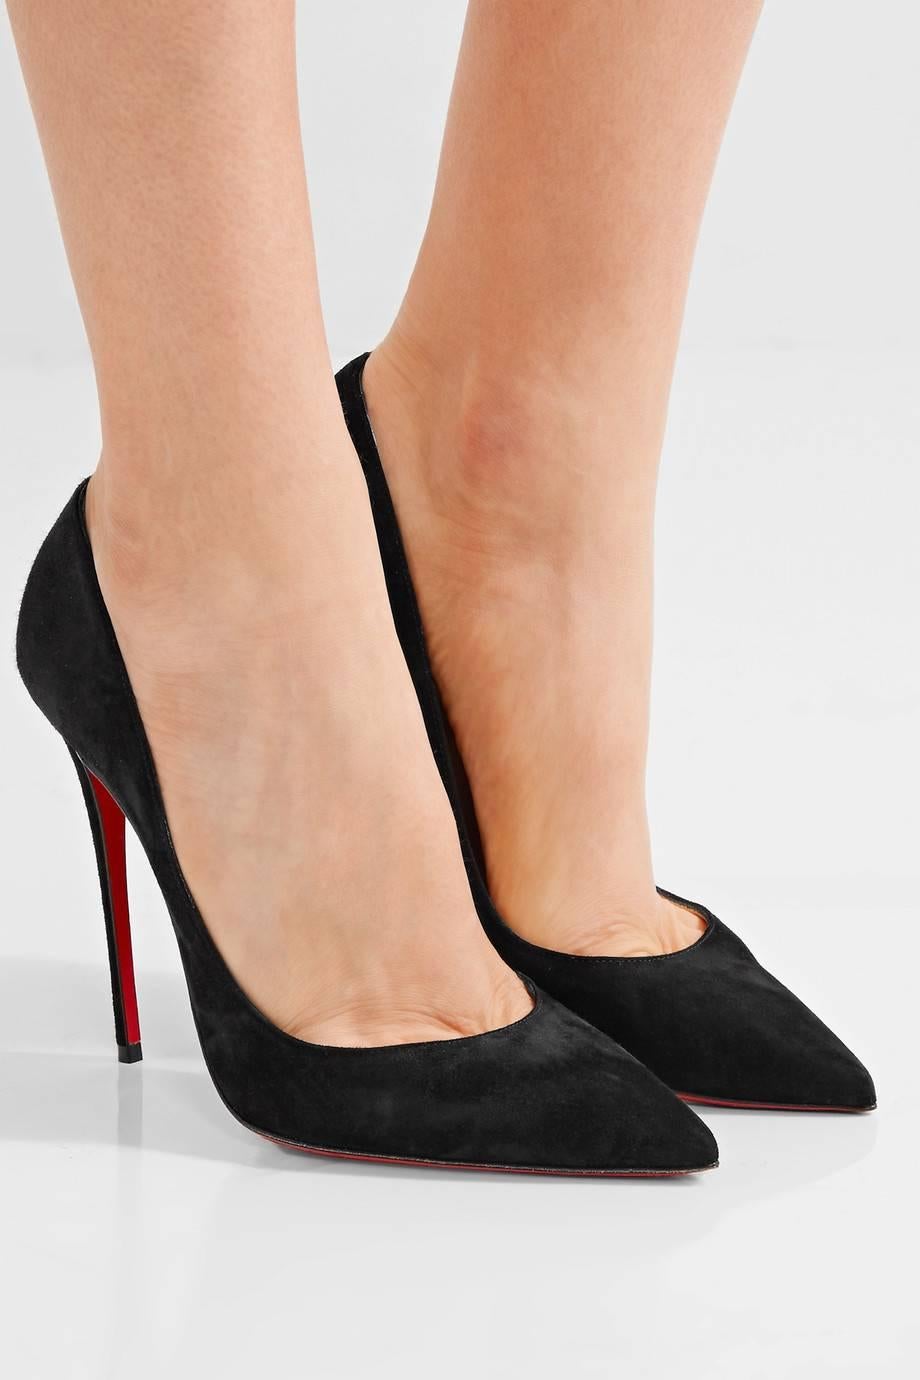 Christian Louboutin New Black Suede SO Kate Evening High Heels Pumps in Box 

Size IT 36.5
Suede
Slip on 
Made in Italy
Heel height 4.75" (120mm)
Includes original Christian Louboutin box